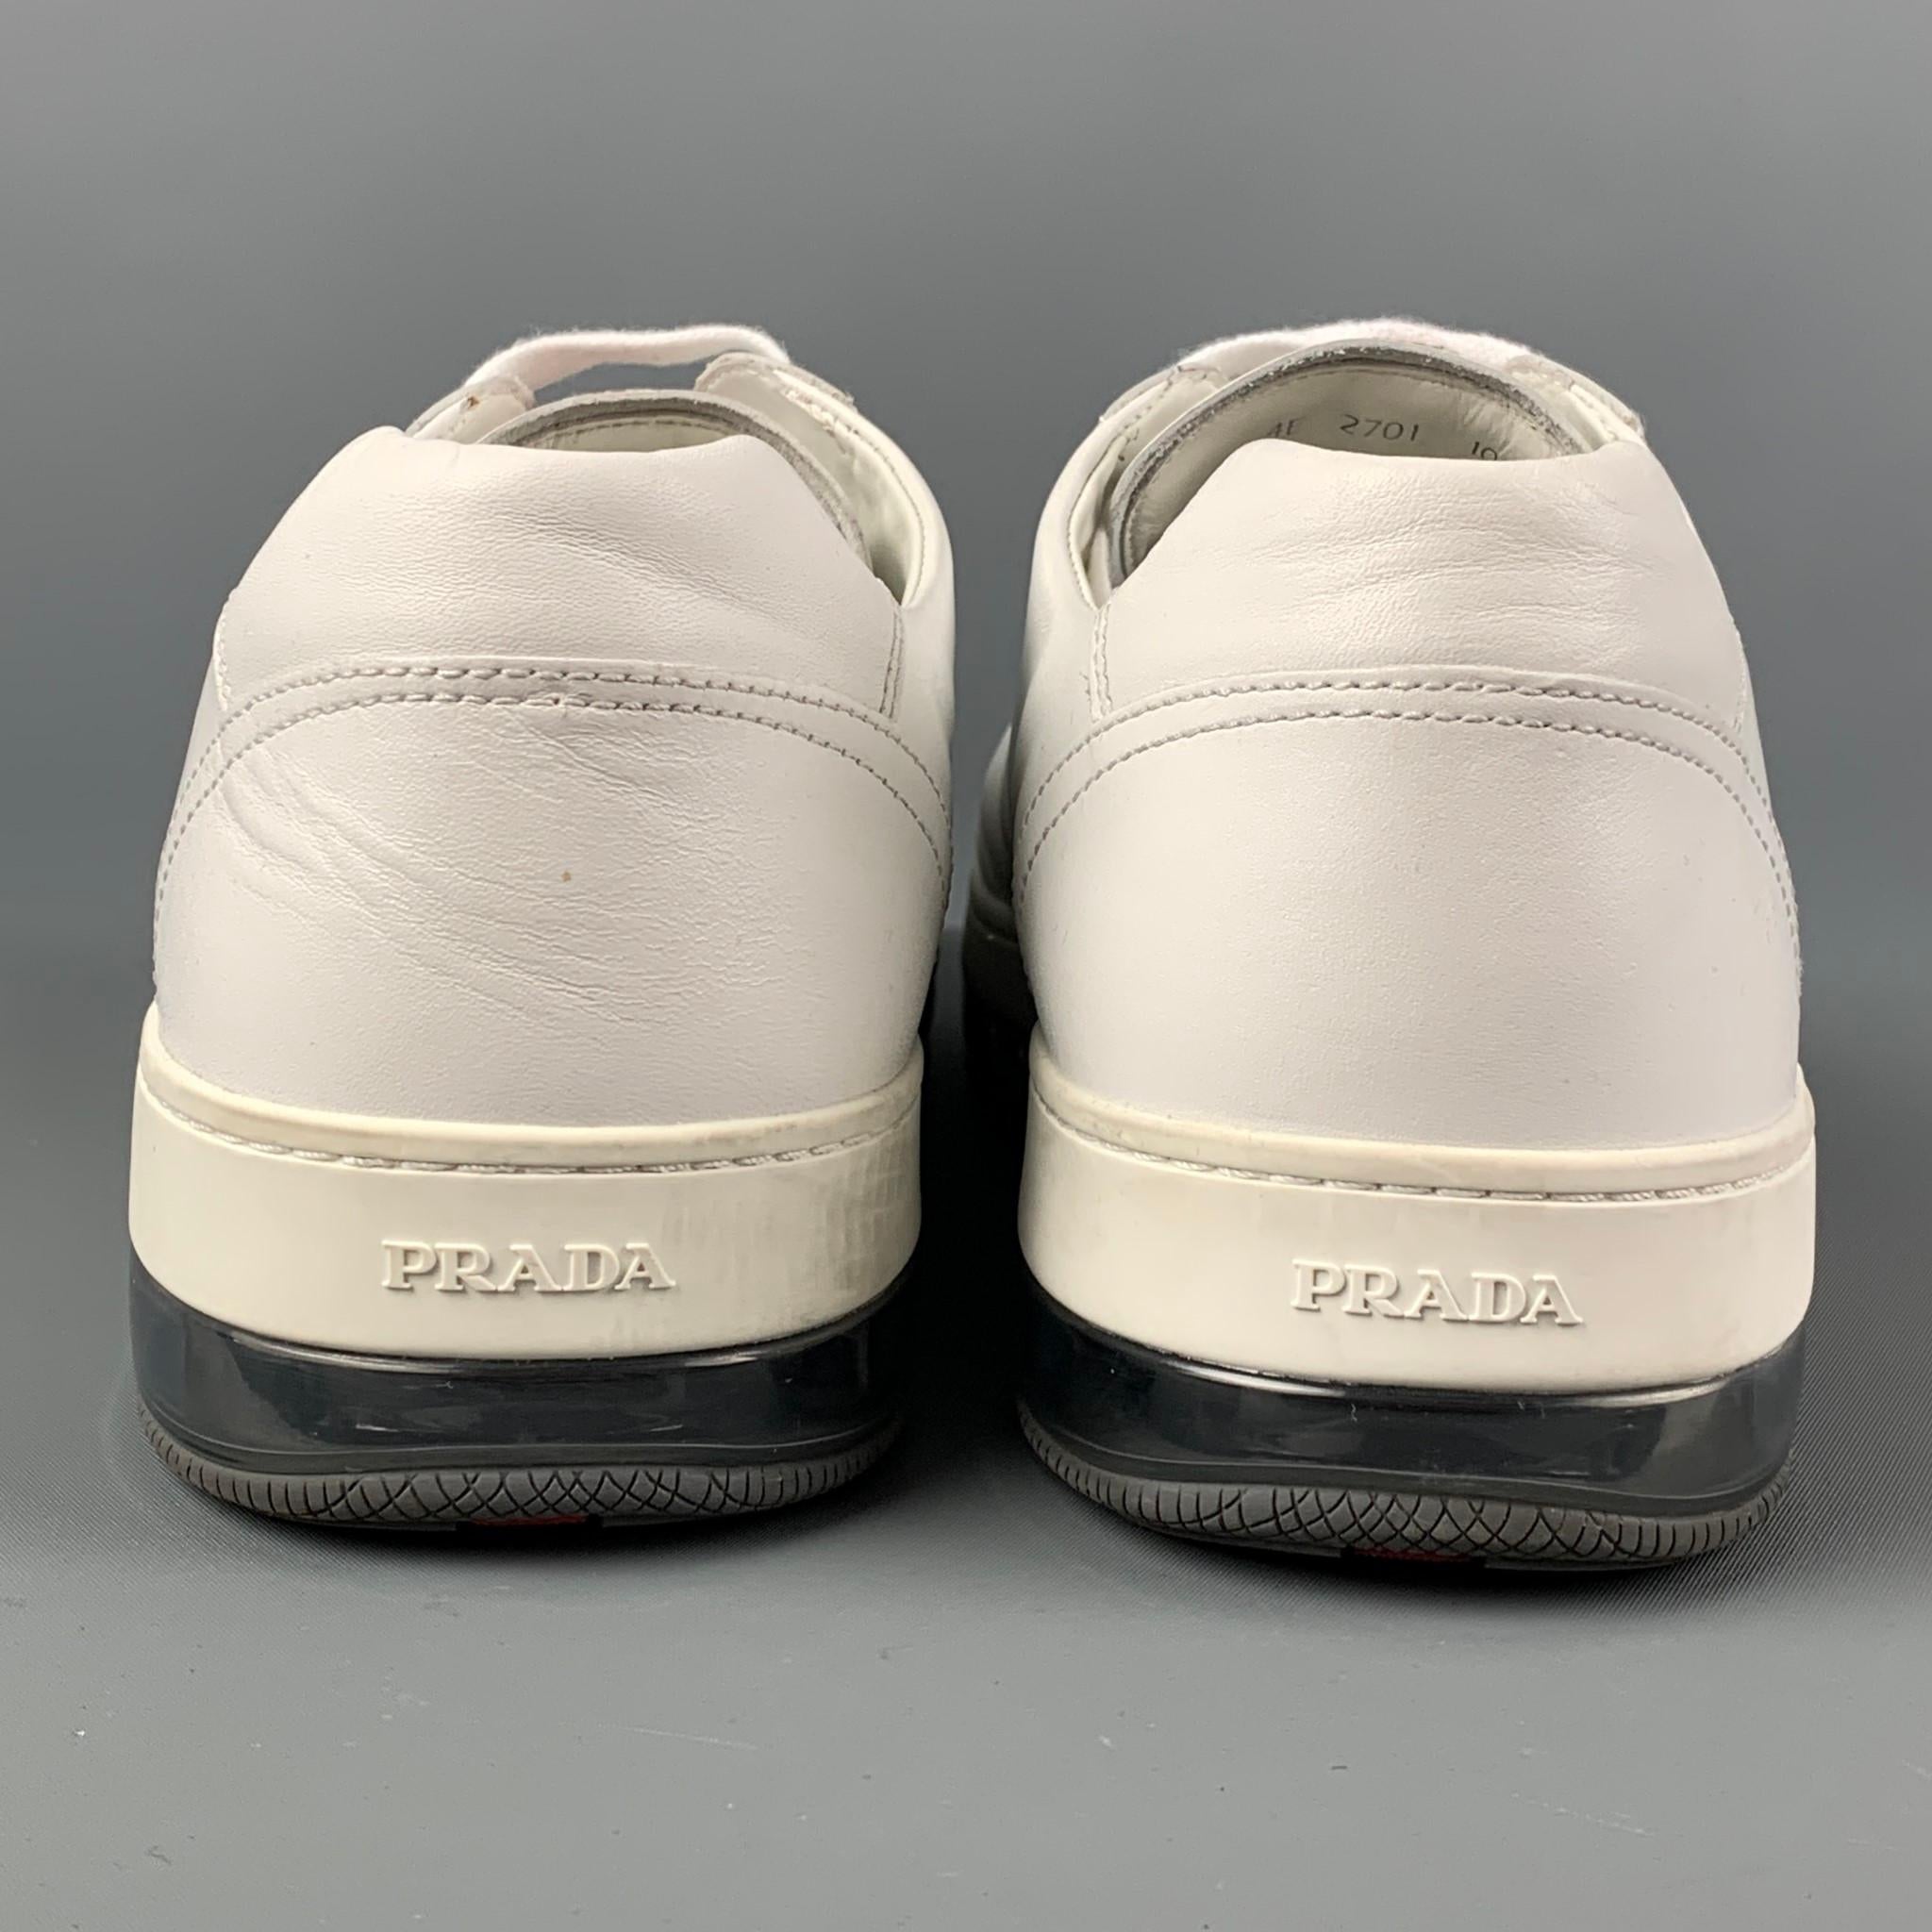 PRADA Size 11.5 White Leather Lace Up Sneakers 1